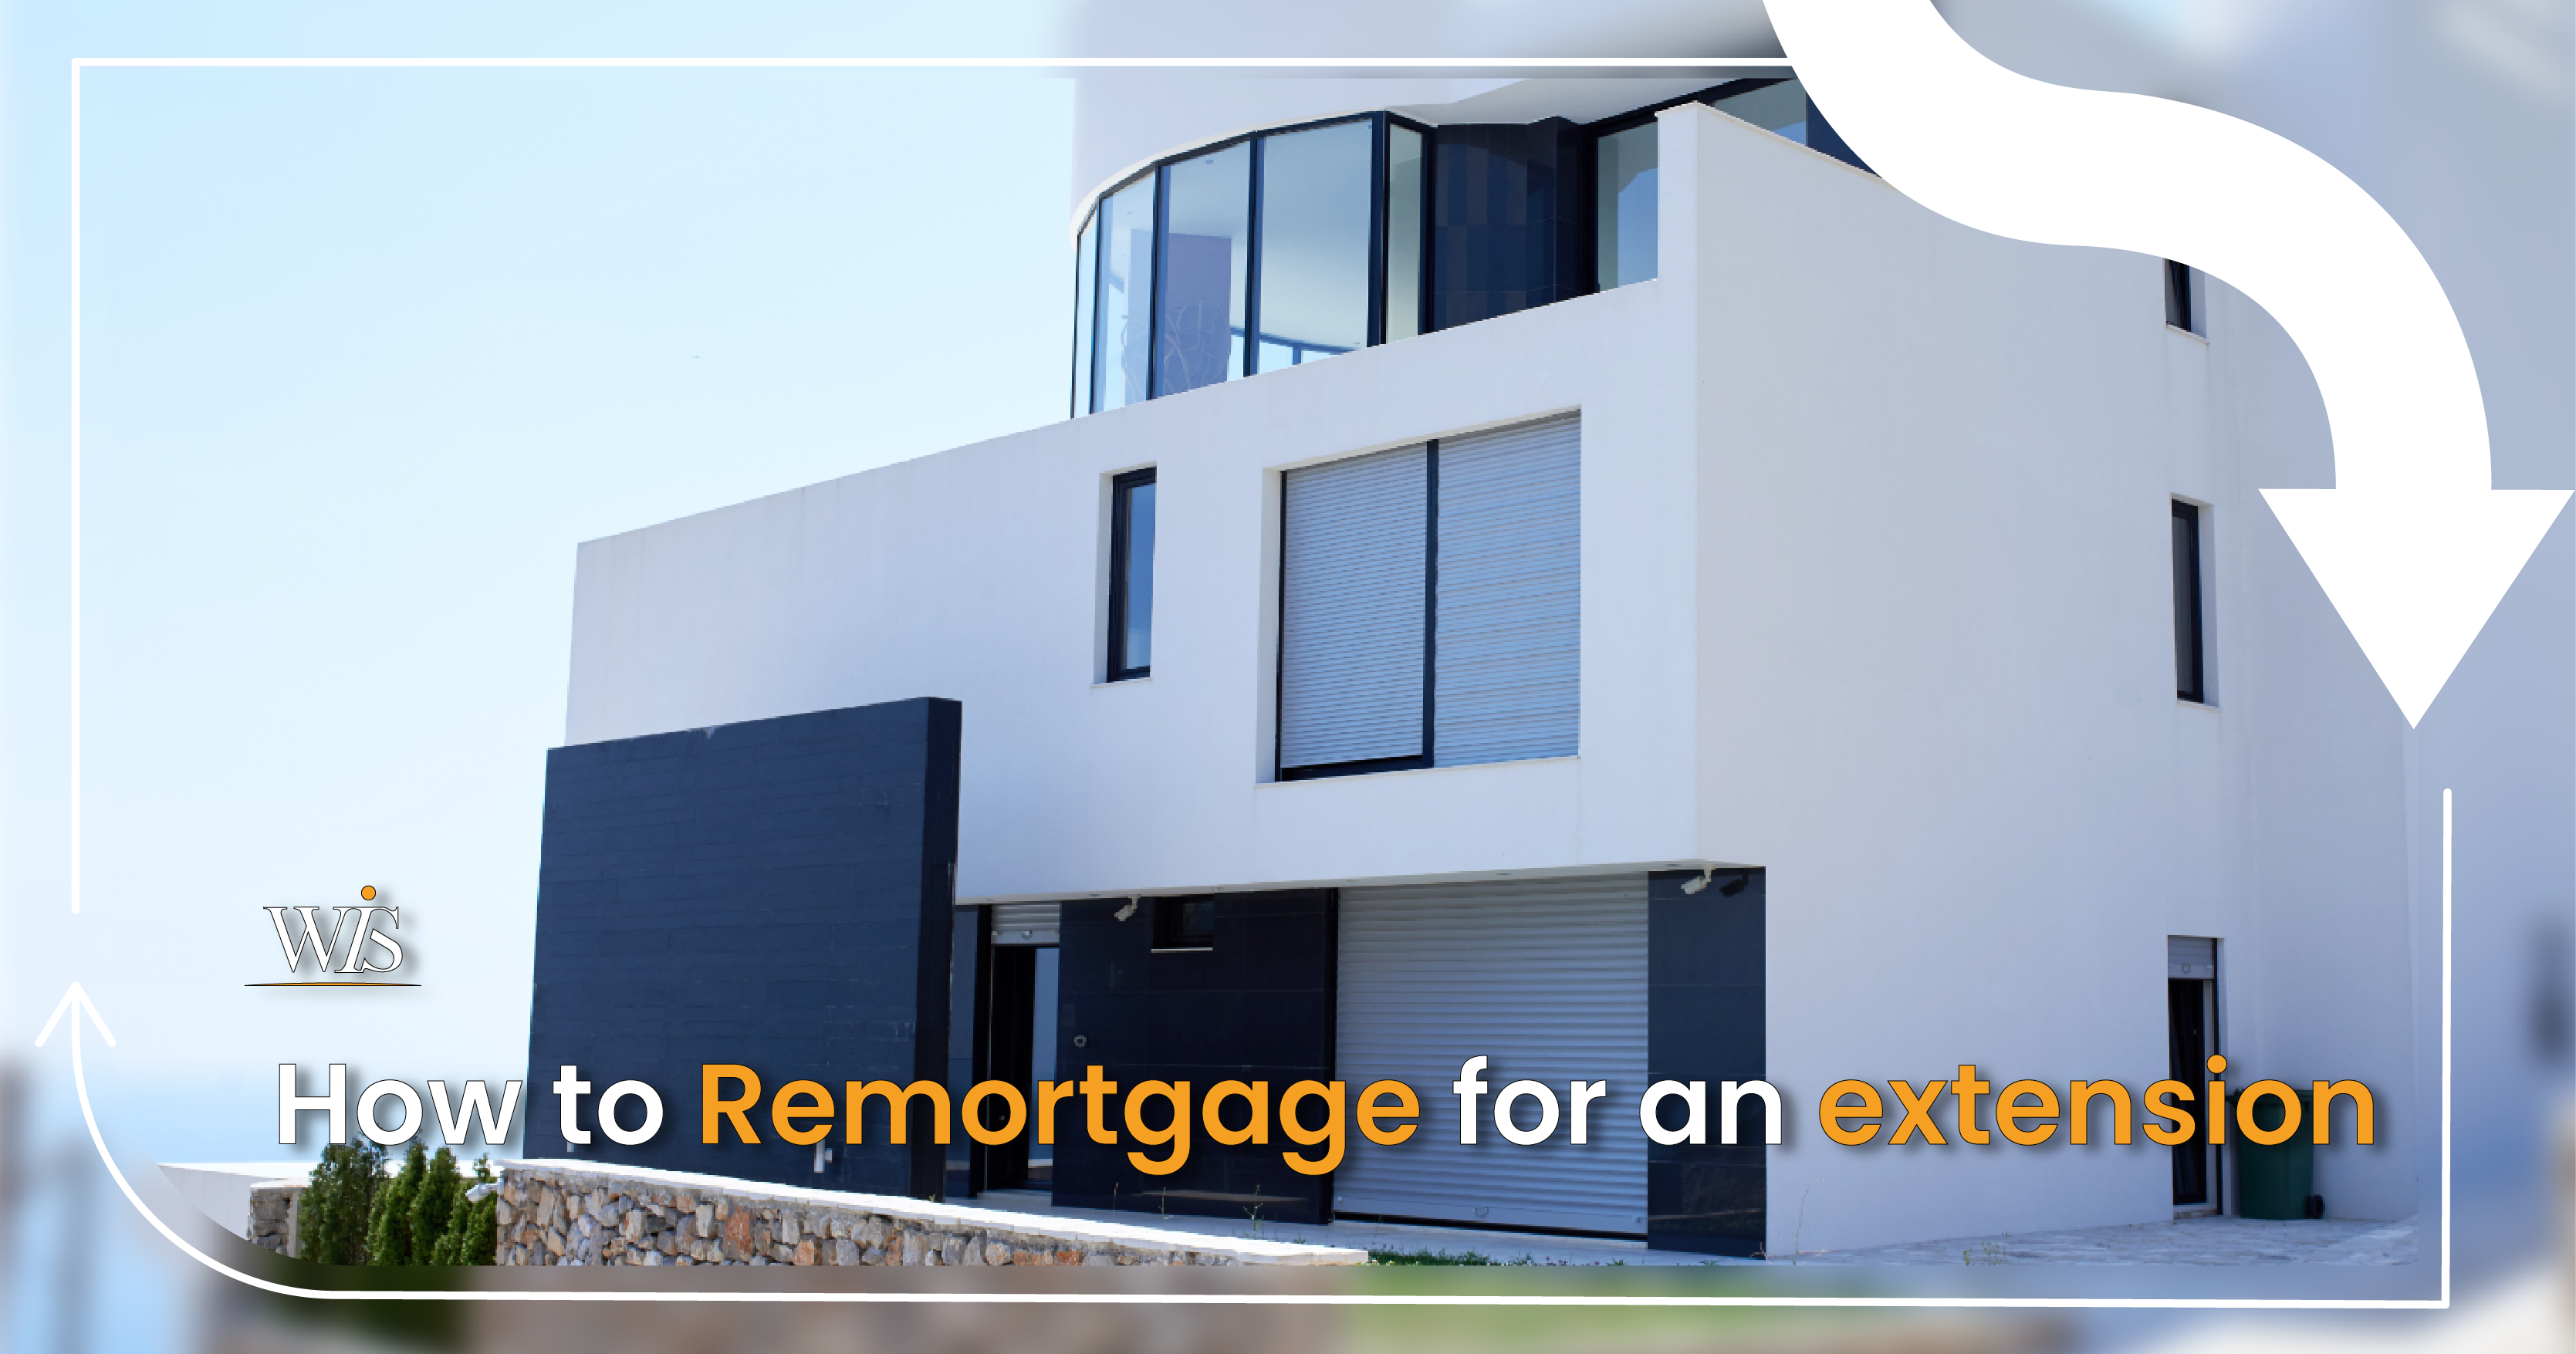 How to remortgage for an extension  image